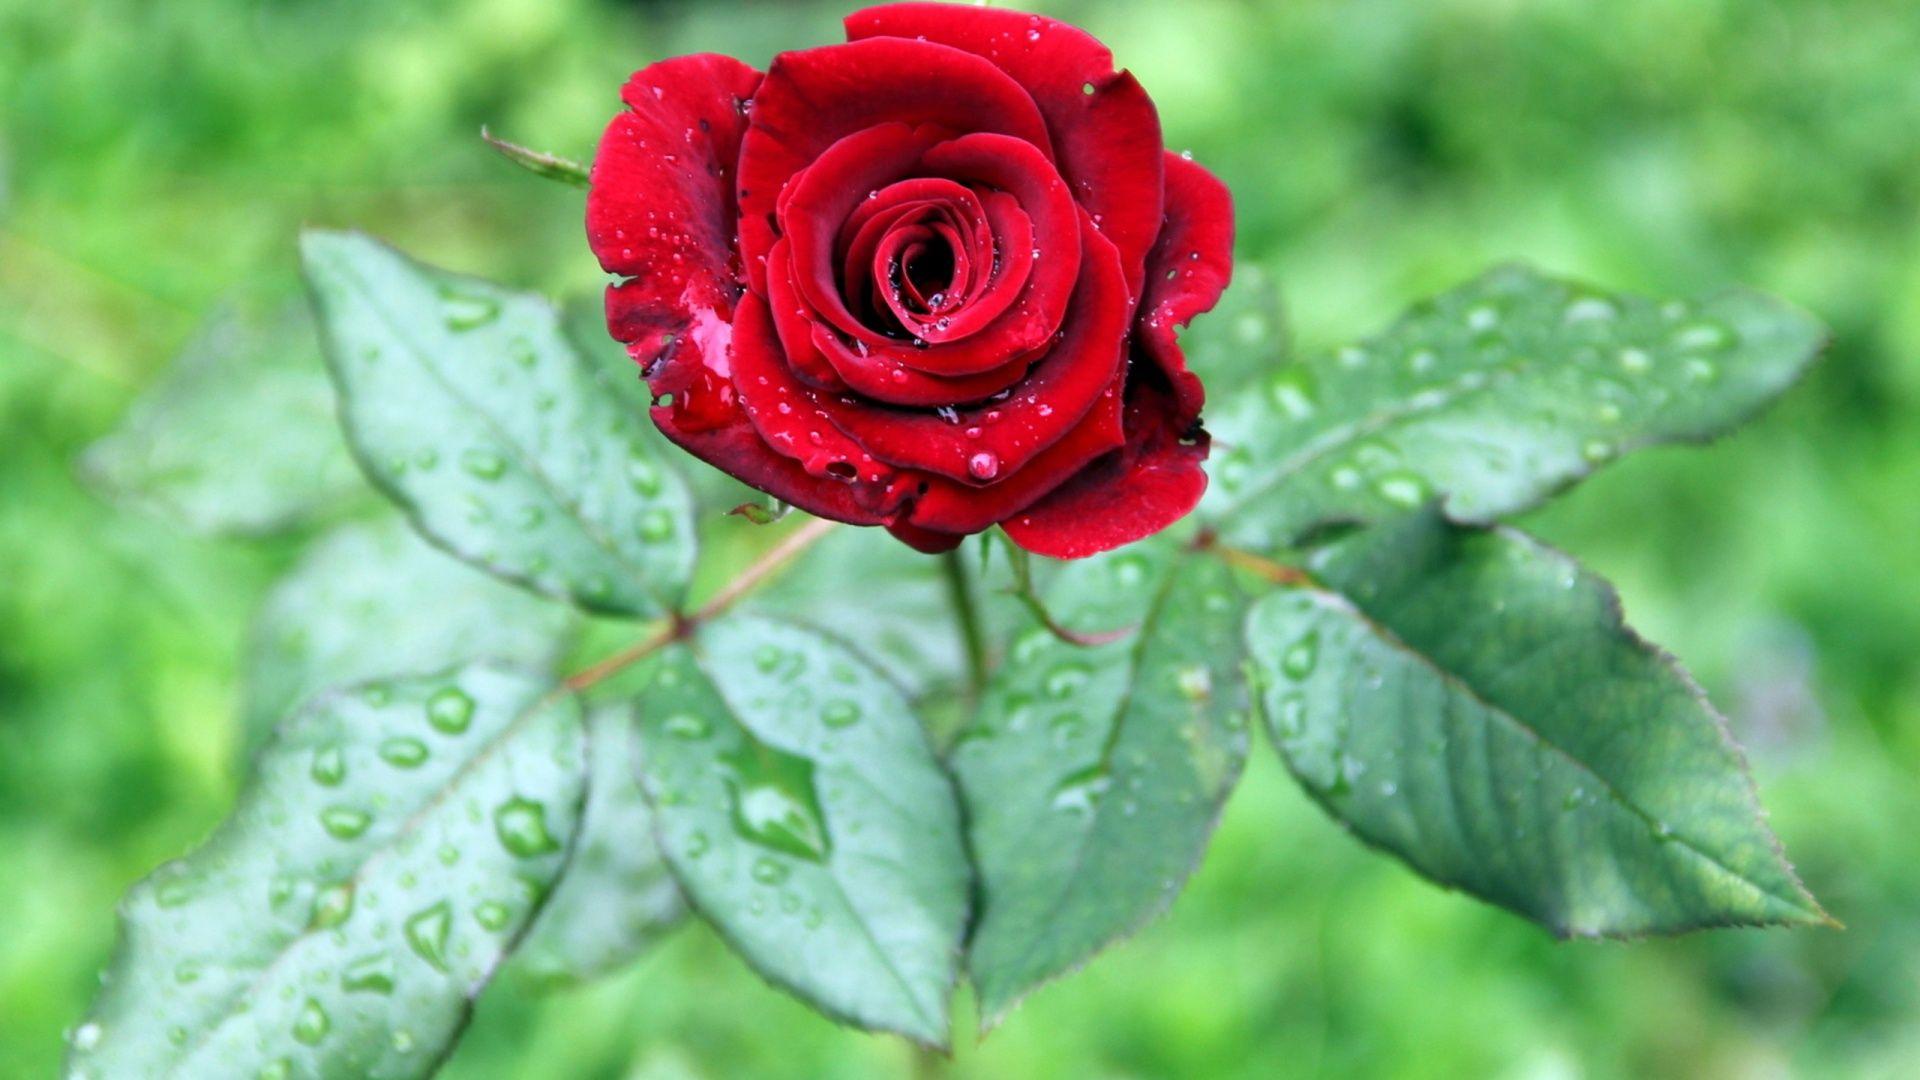 Astonishing rain droplet rose leaves HD wallpaper. You can just